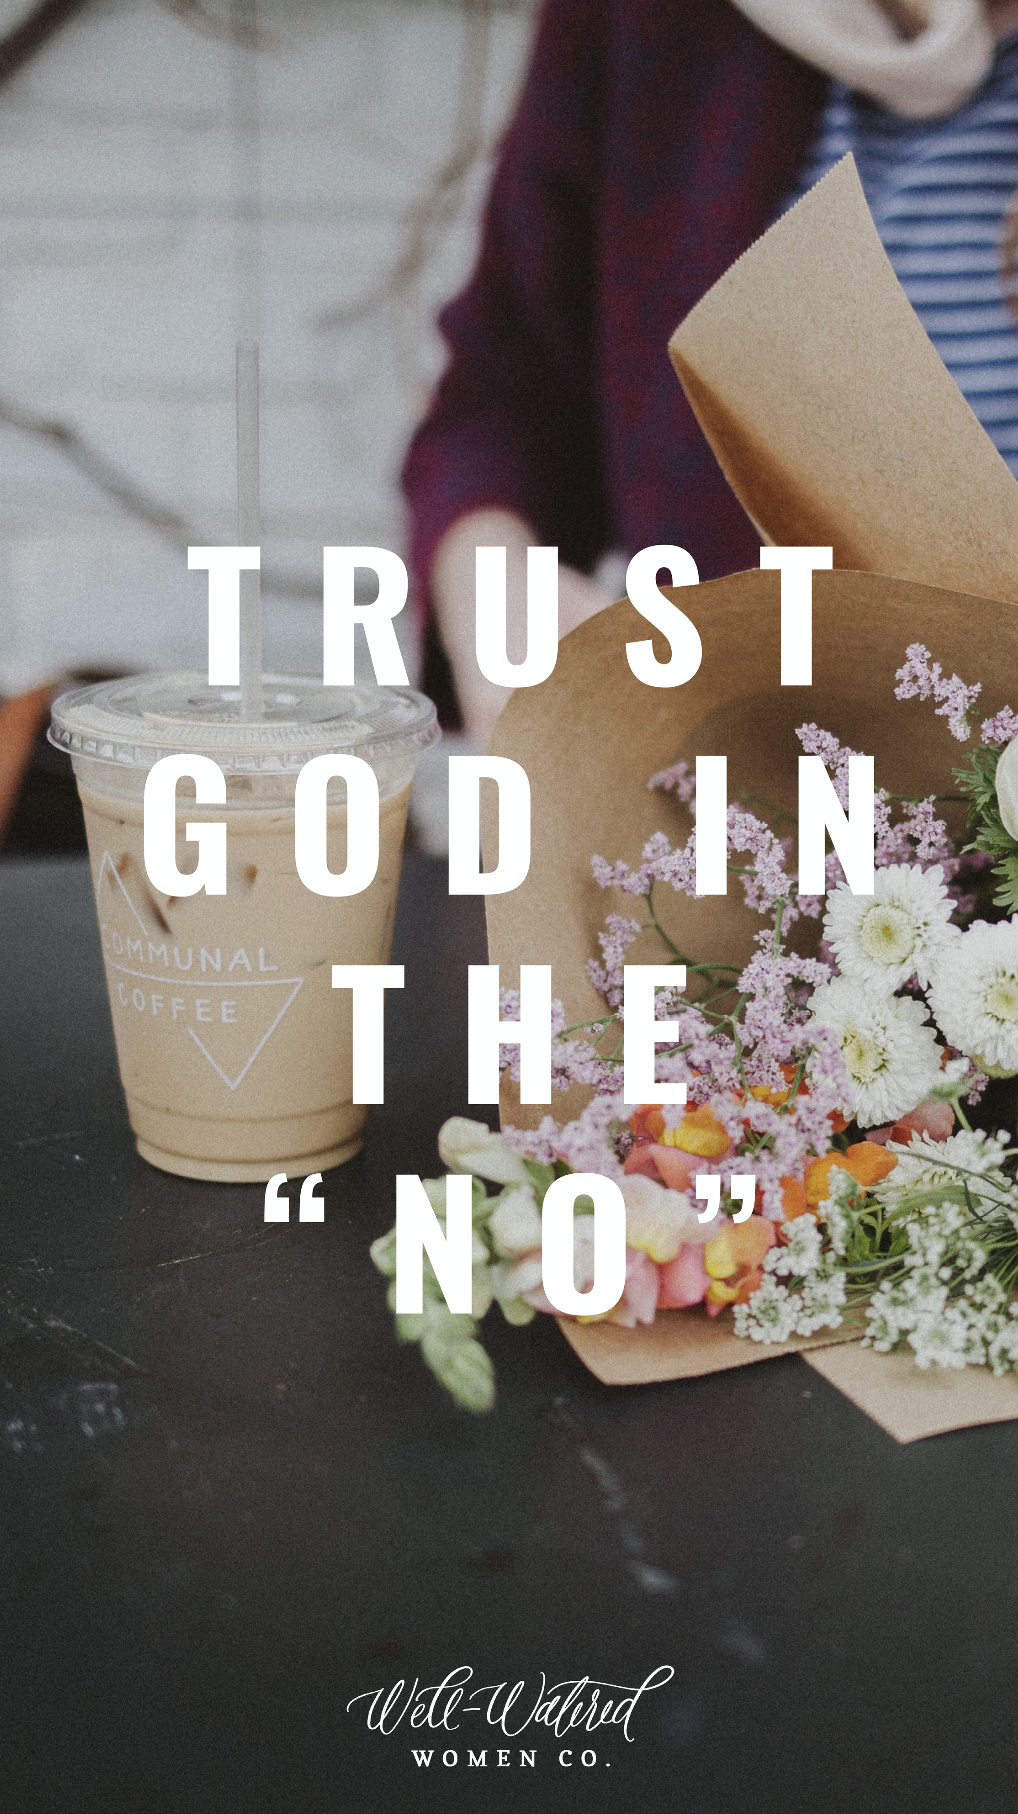 Trust God in the No, even if you don't know when you'll see the "yes".